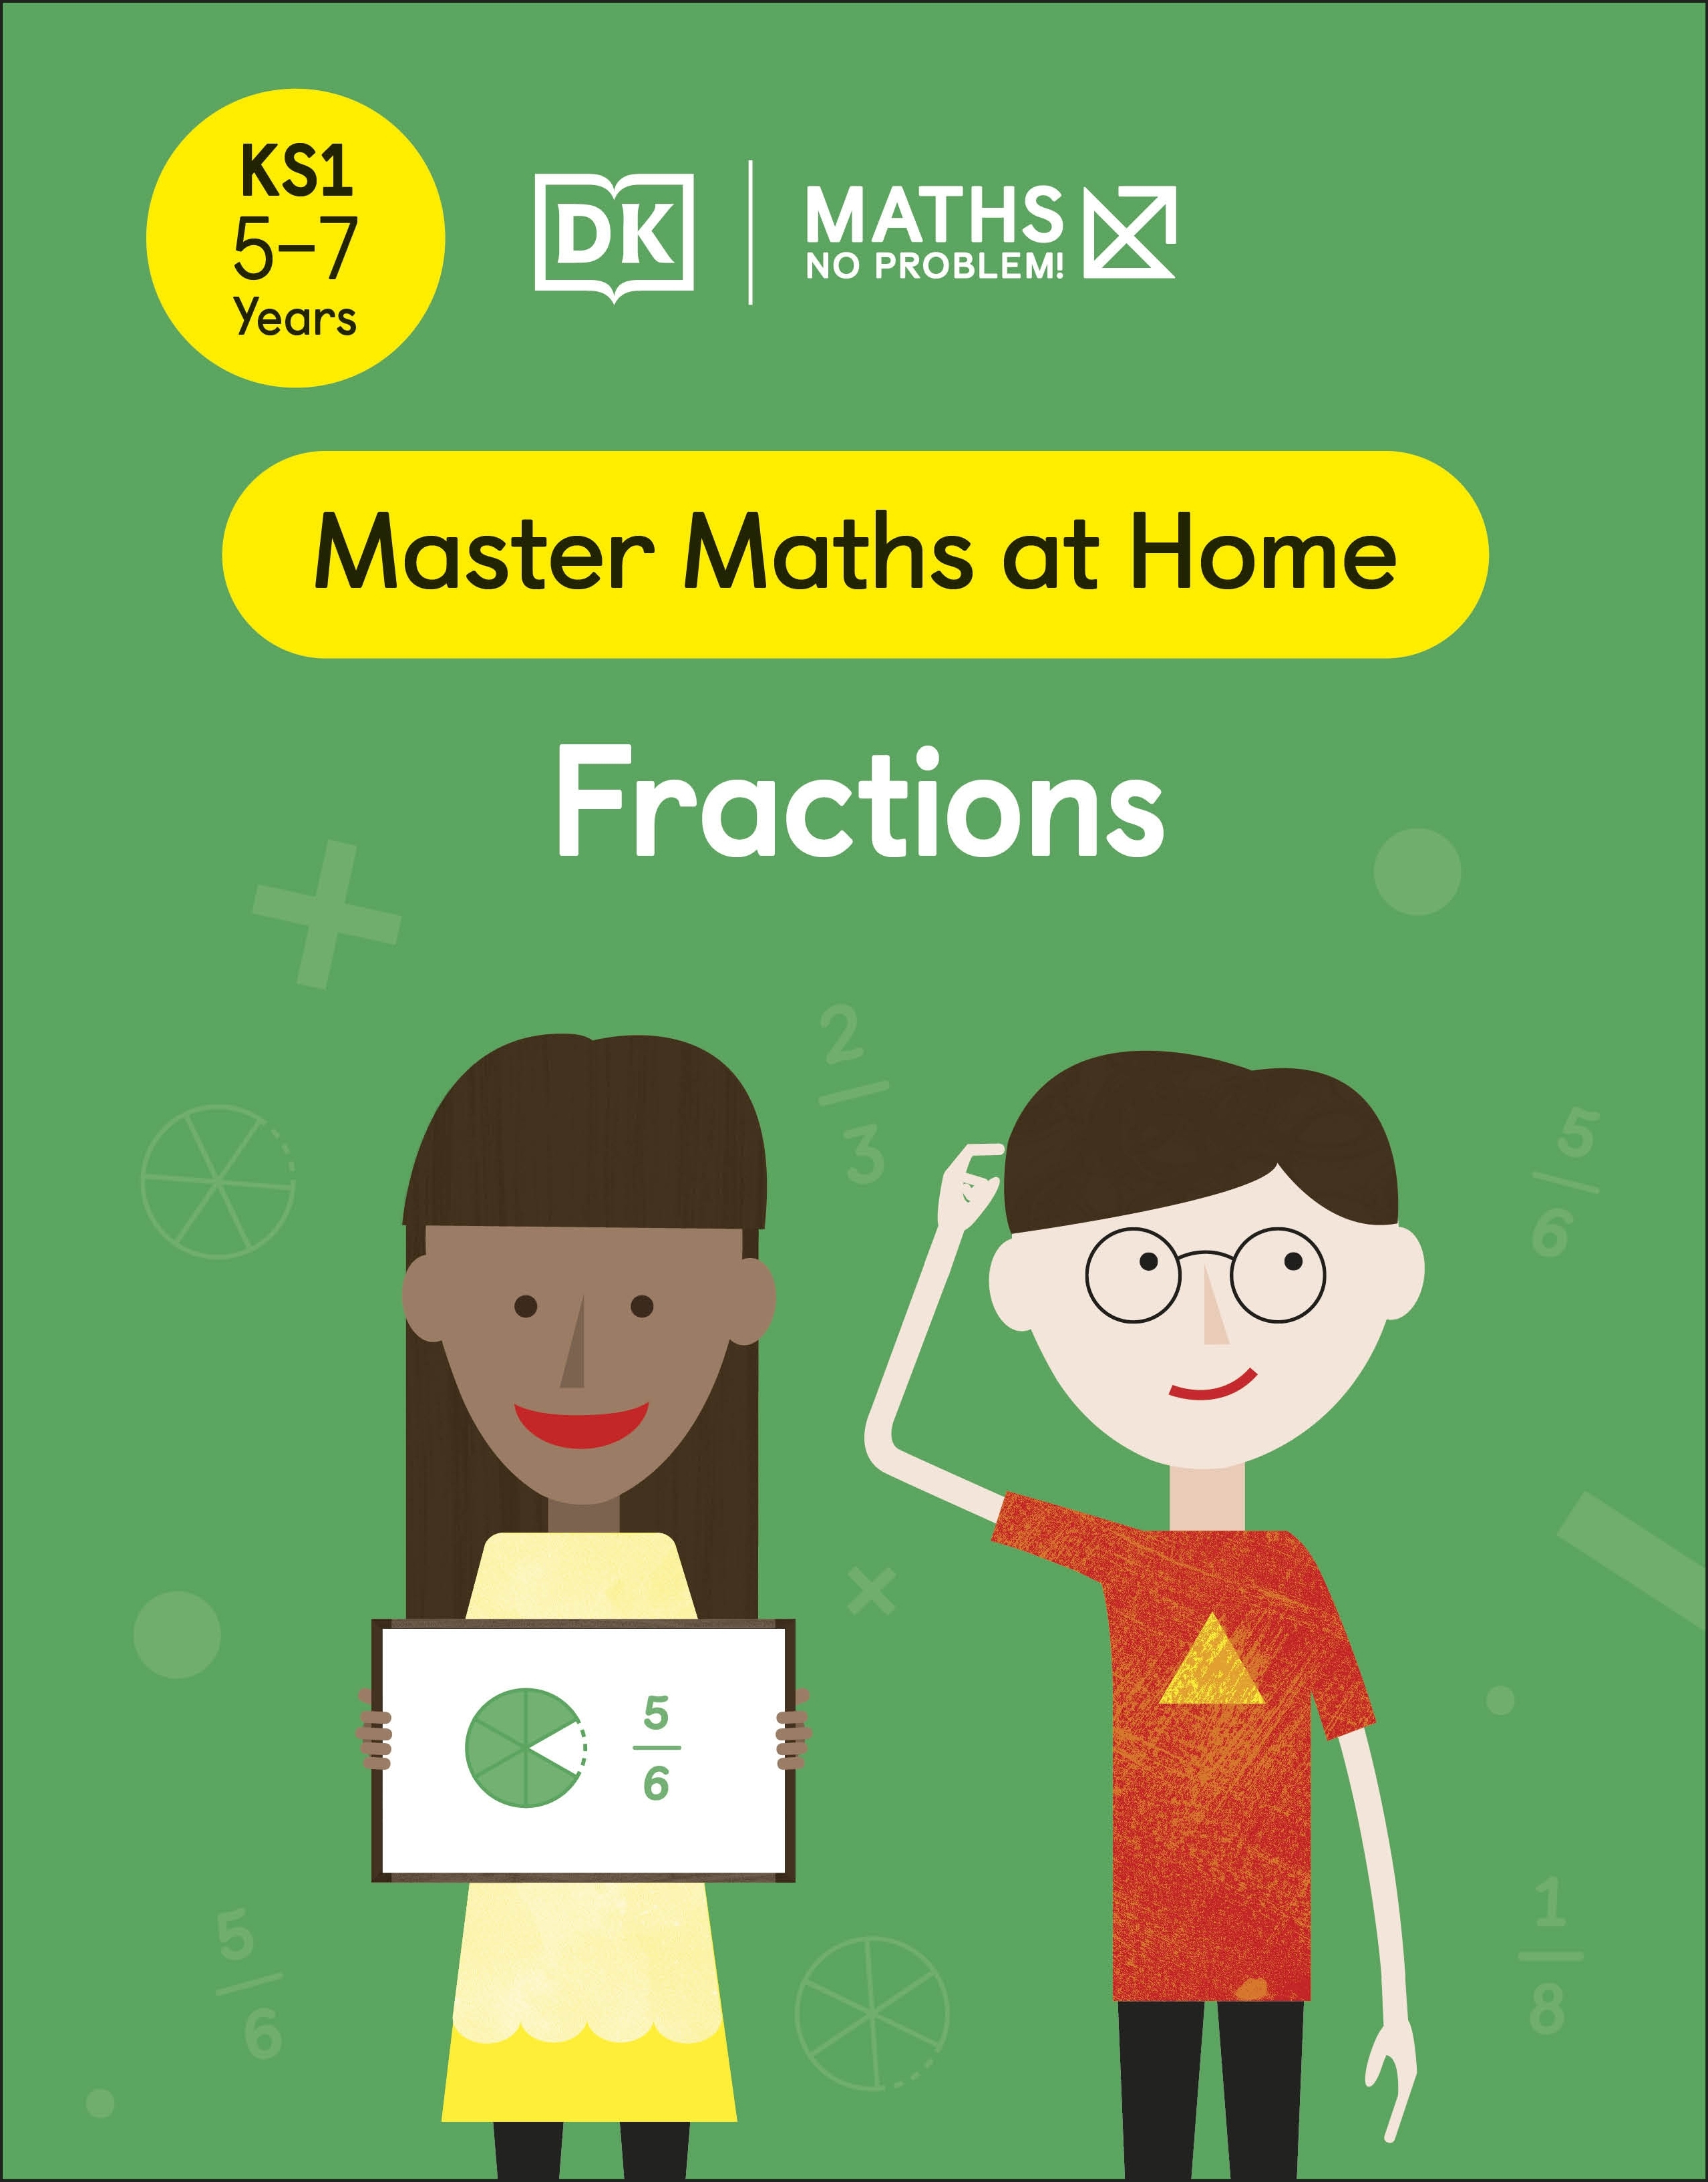 Mastering mathematics. Key Stages учебник. Master Math. Math problems. Problems for fraction numbers.